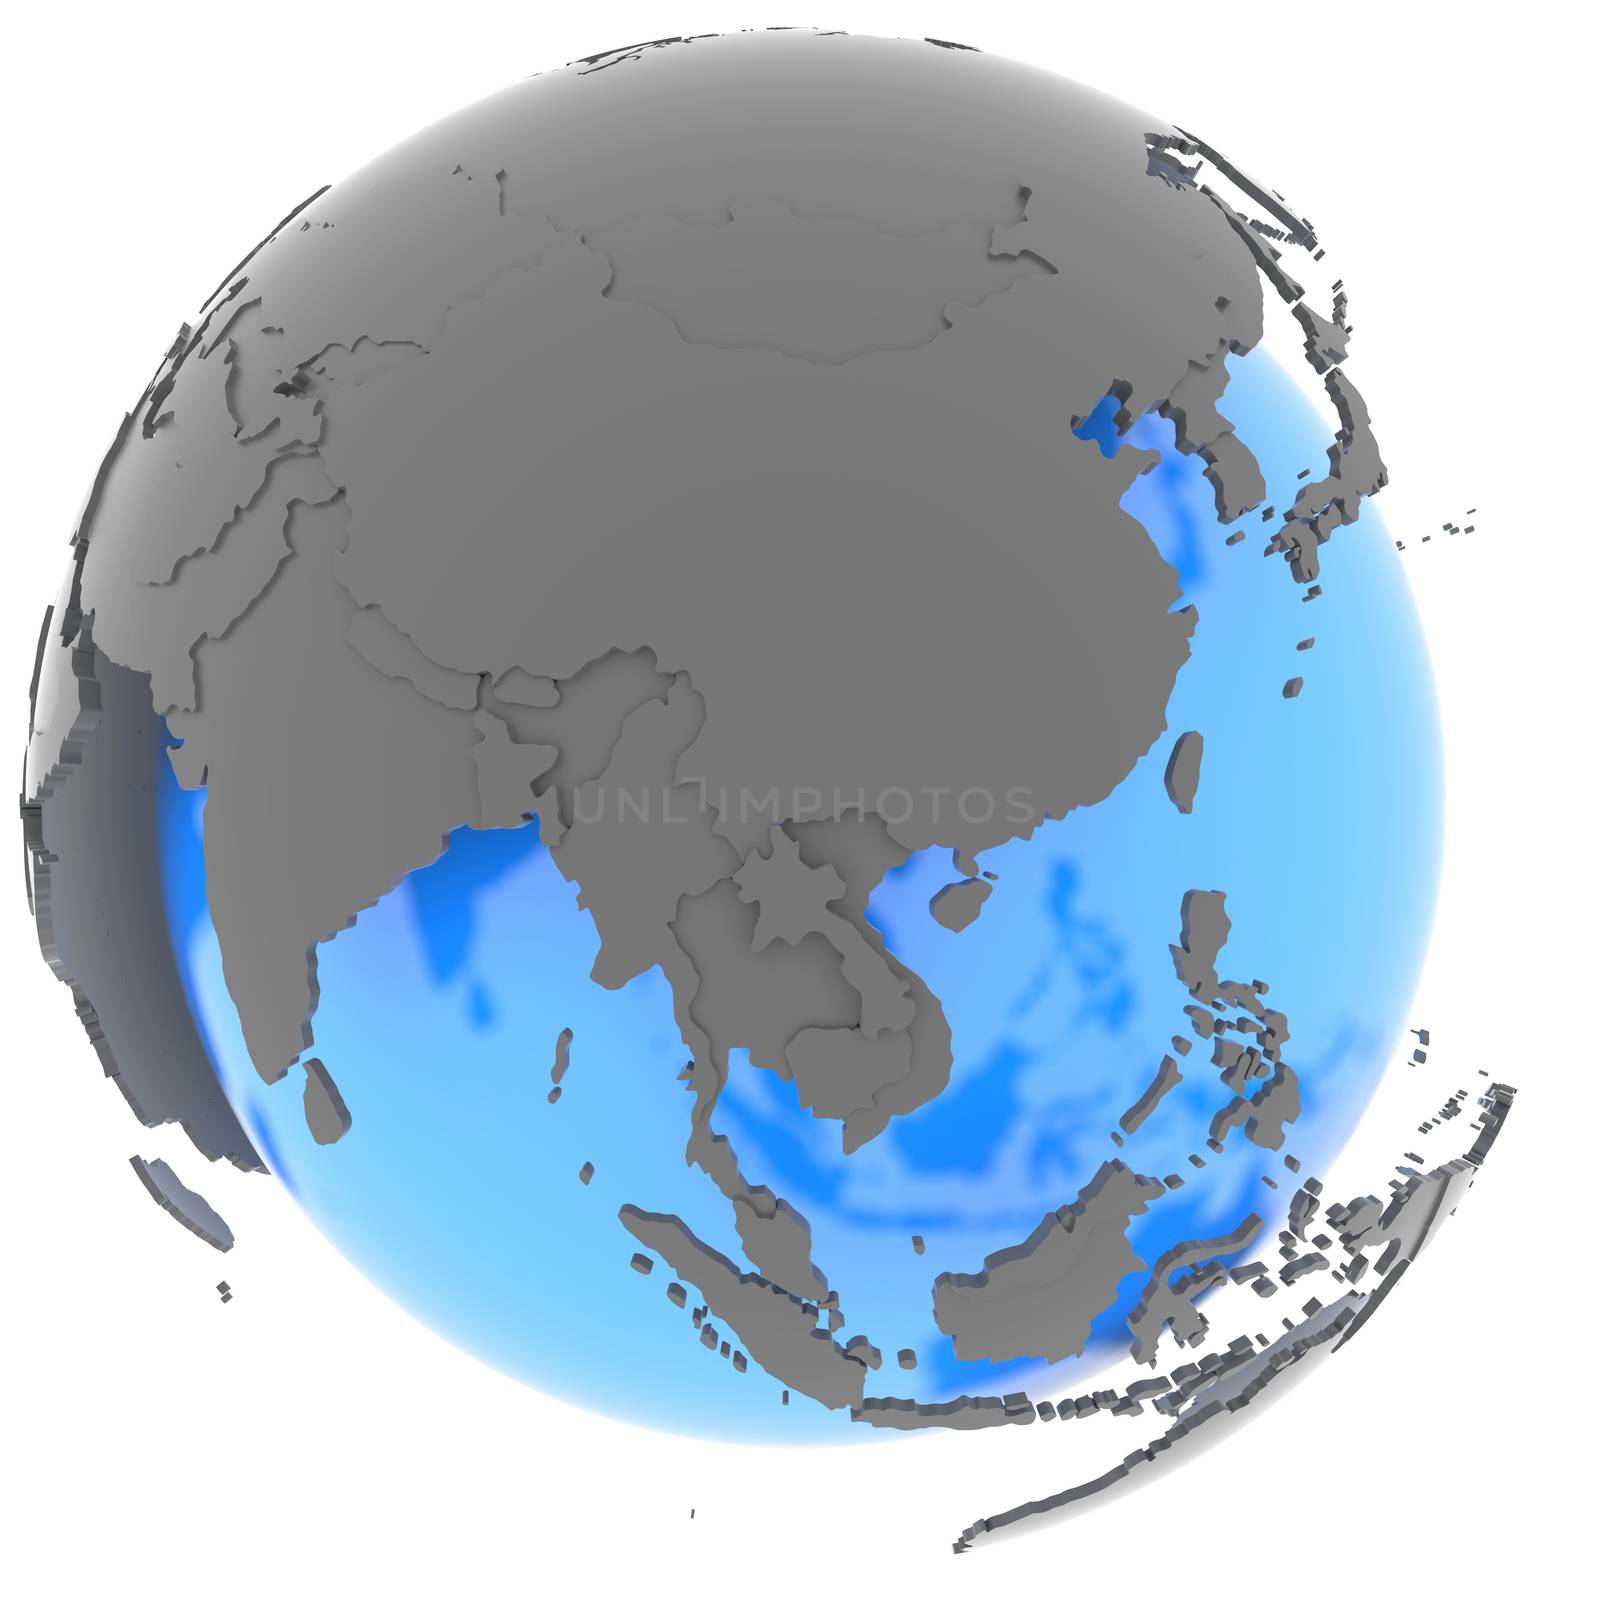 East Asia on the globe by Harvepino